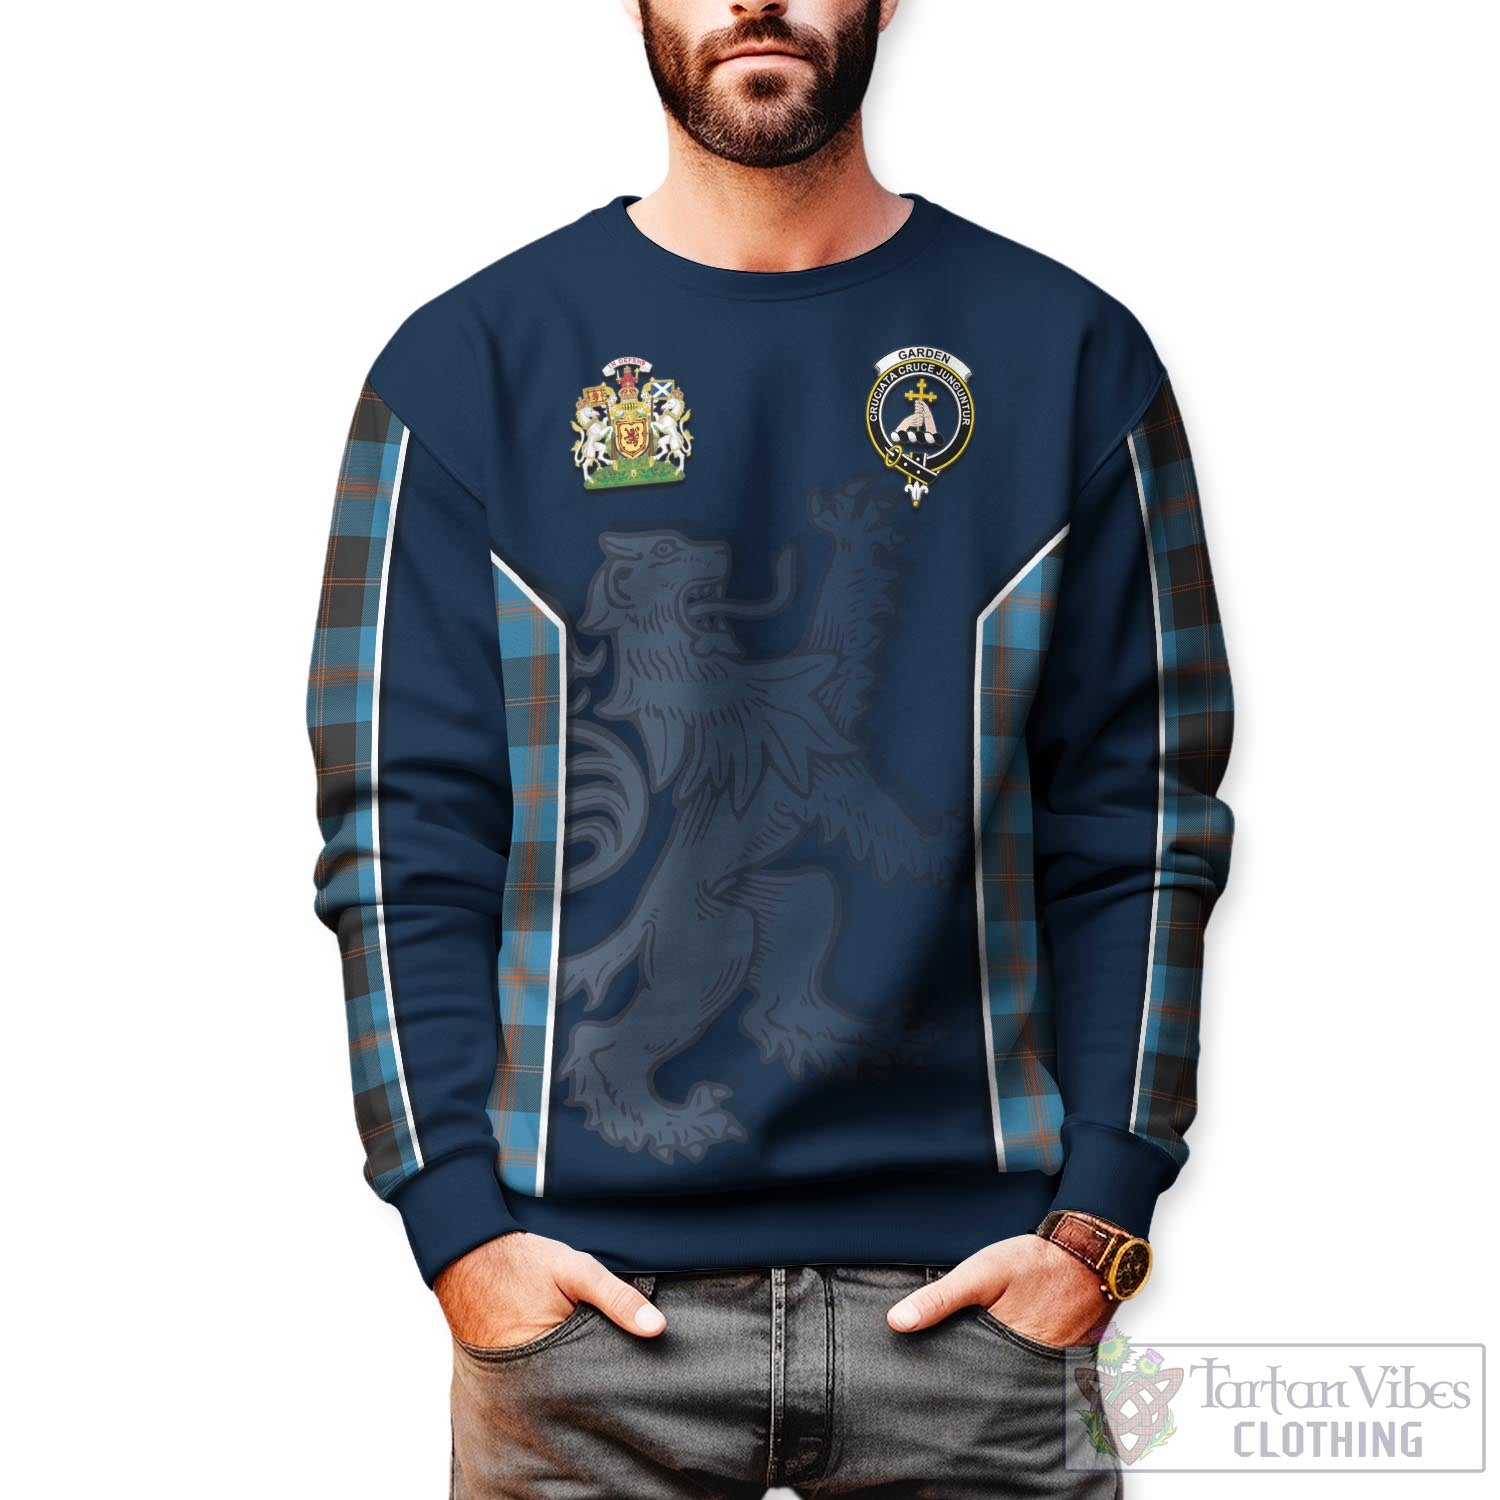 Tartan Vibes Clothing Garden Tartan Sweater with Family Crest and Lion Rampant Vibes Sport Style